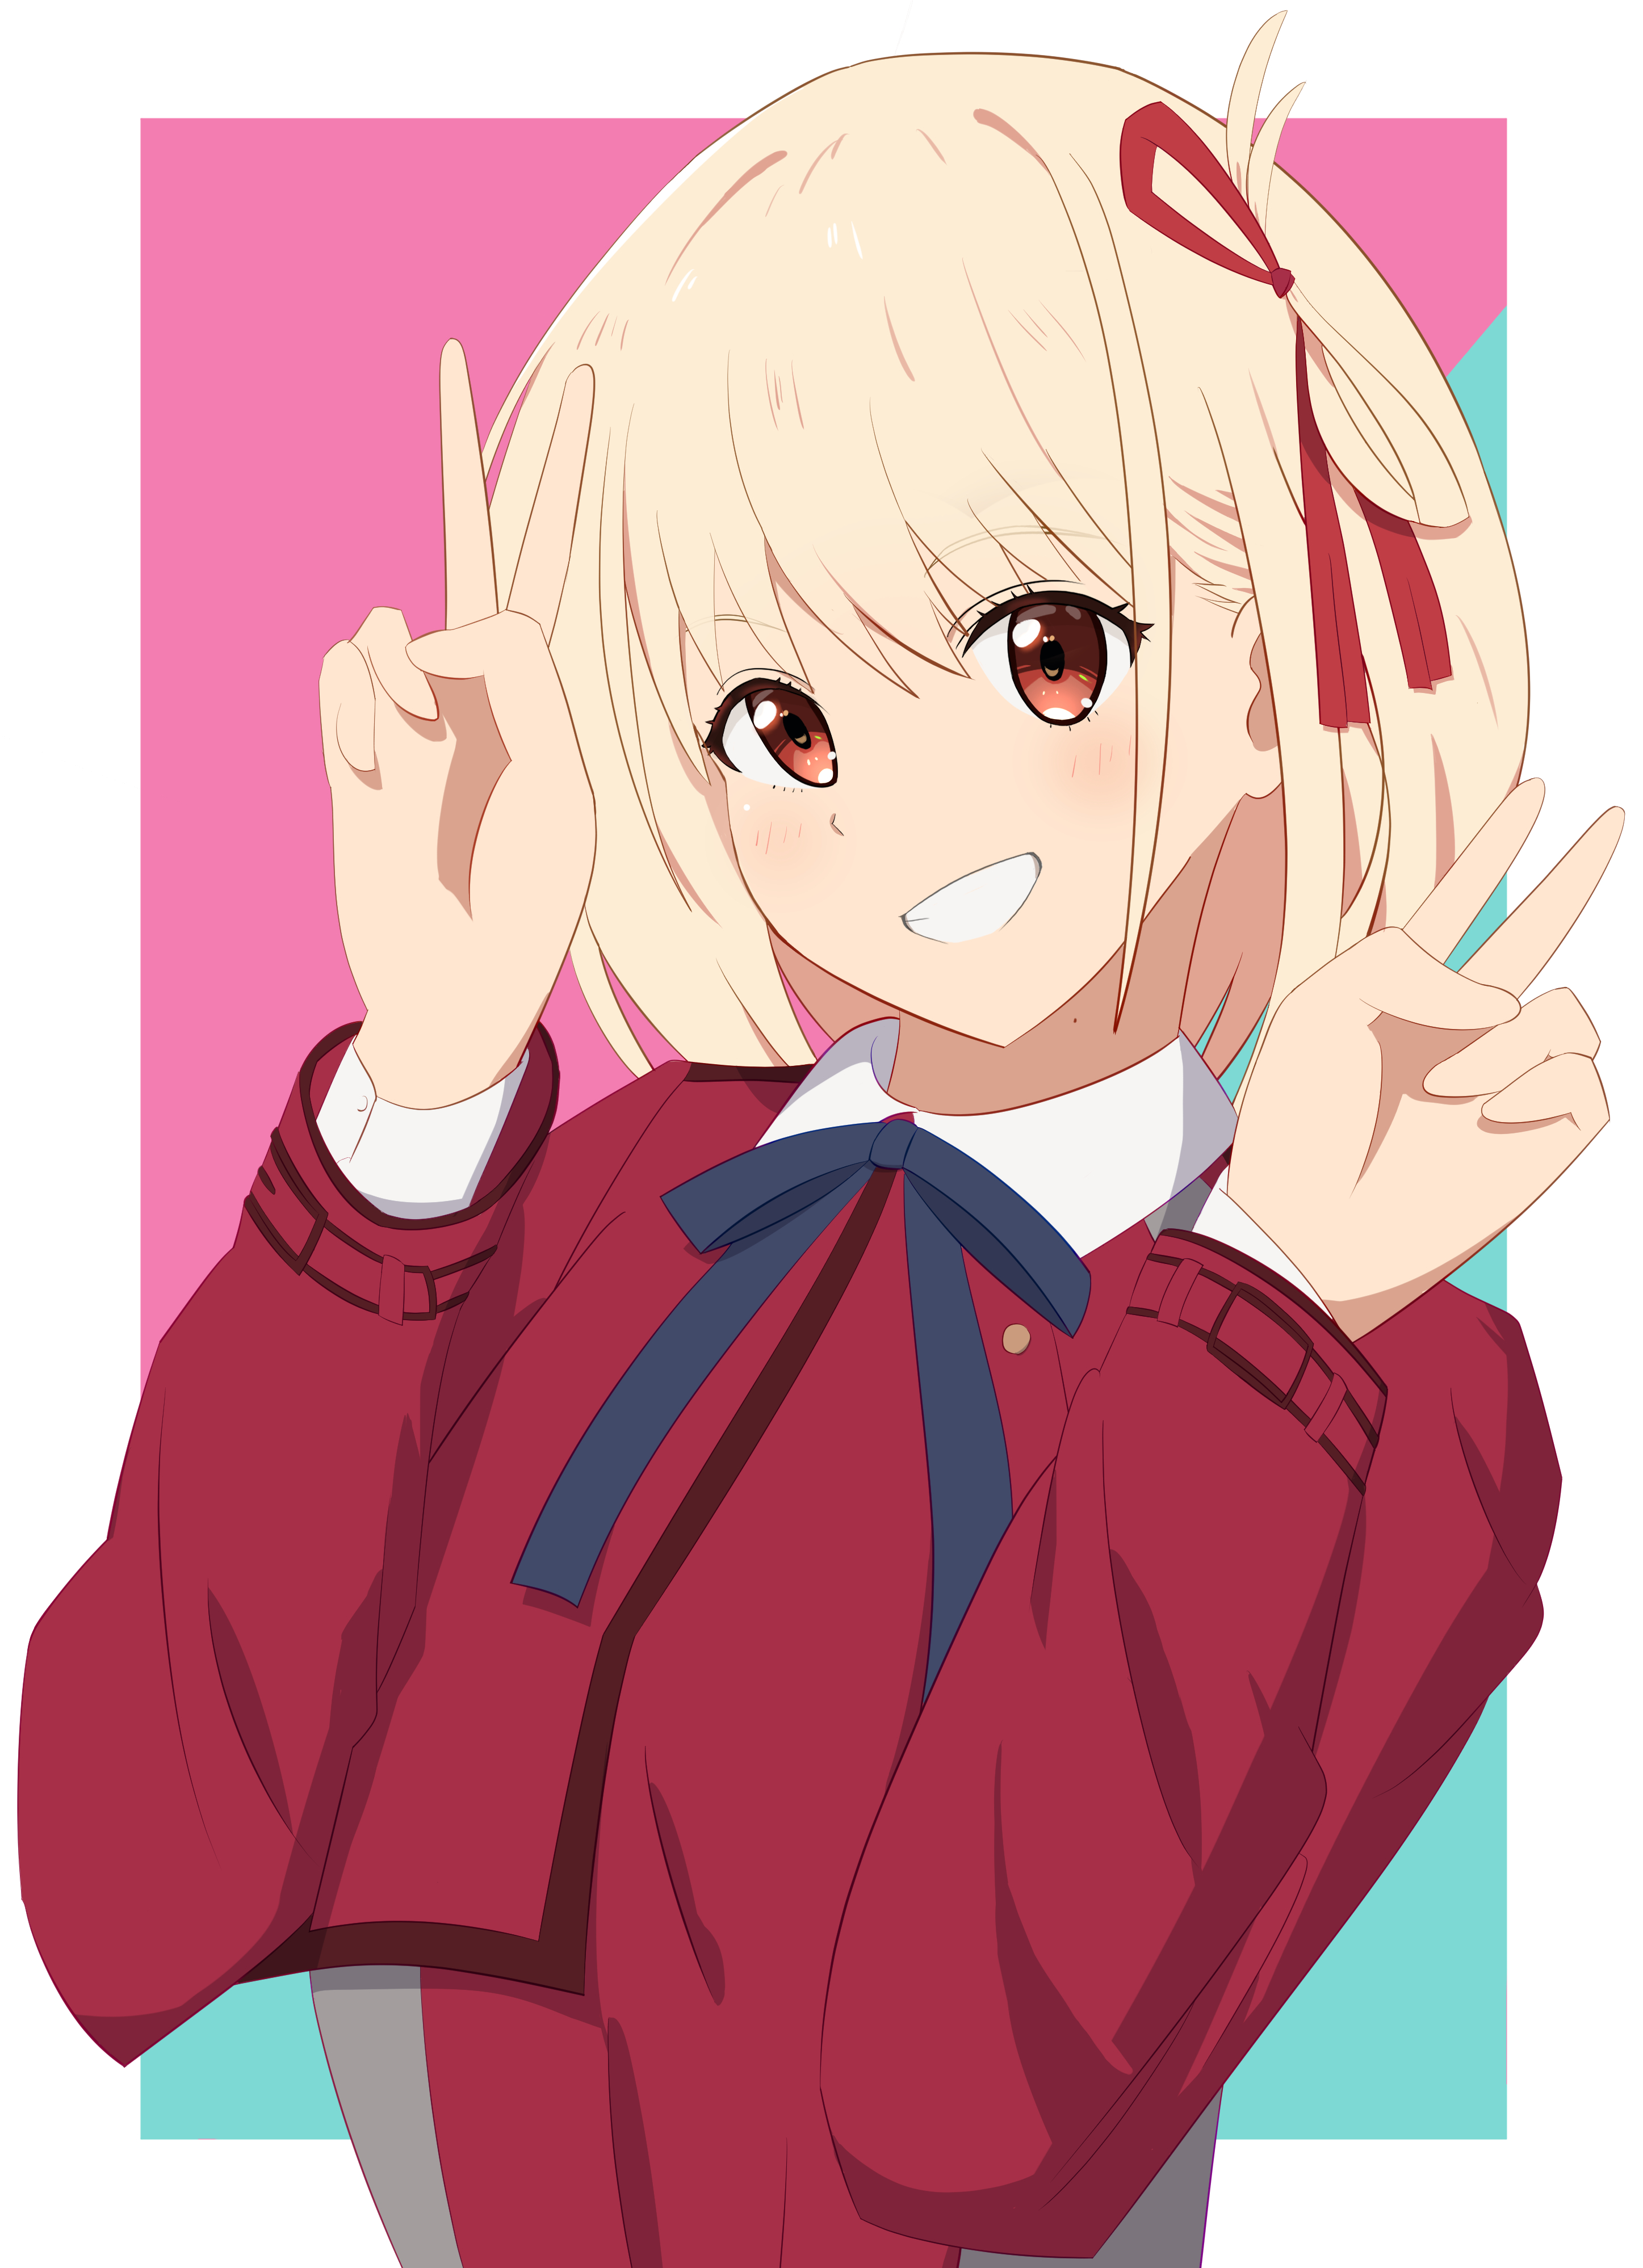 Anime 2894x3996 anime anime girls Lycoris Recoil Nishikigi Chisato blonde solo artwork digital art fan art hand gesture victory sign smiling long hair looking at viewer red eyes